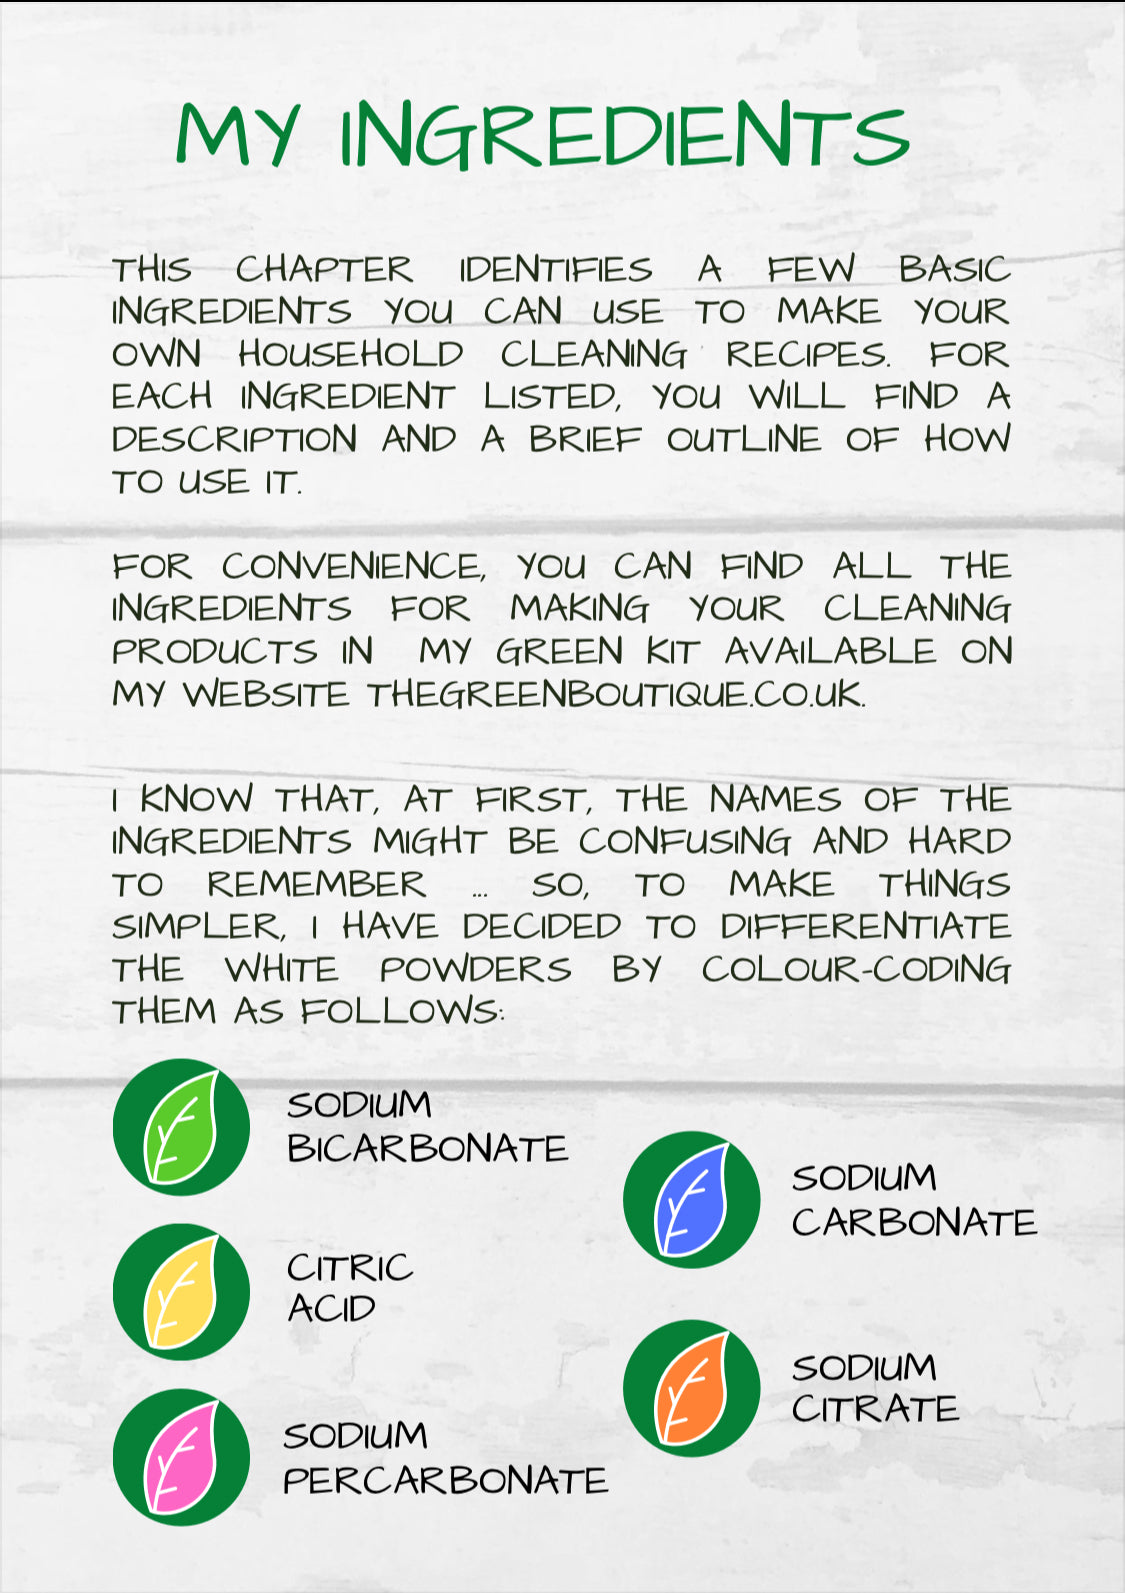 MY SUSTAINABLE CLEANING GUIDE